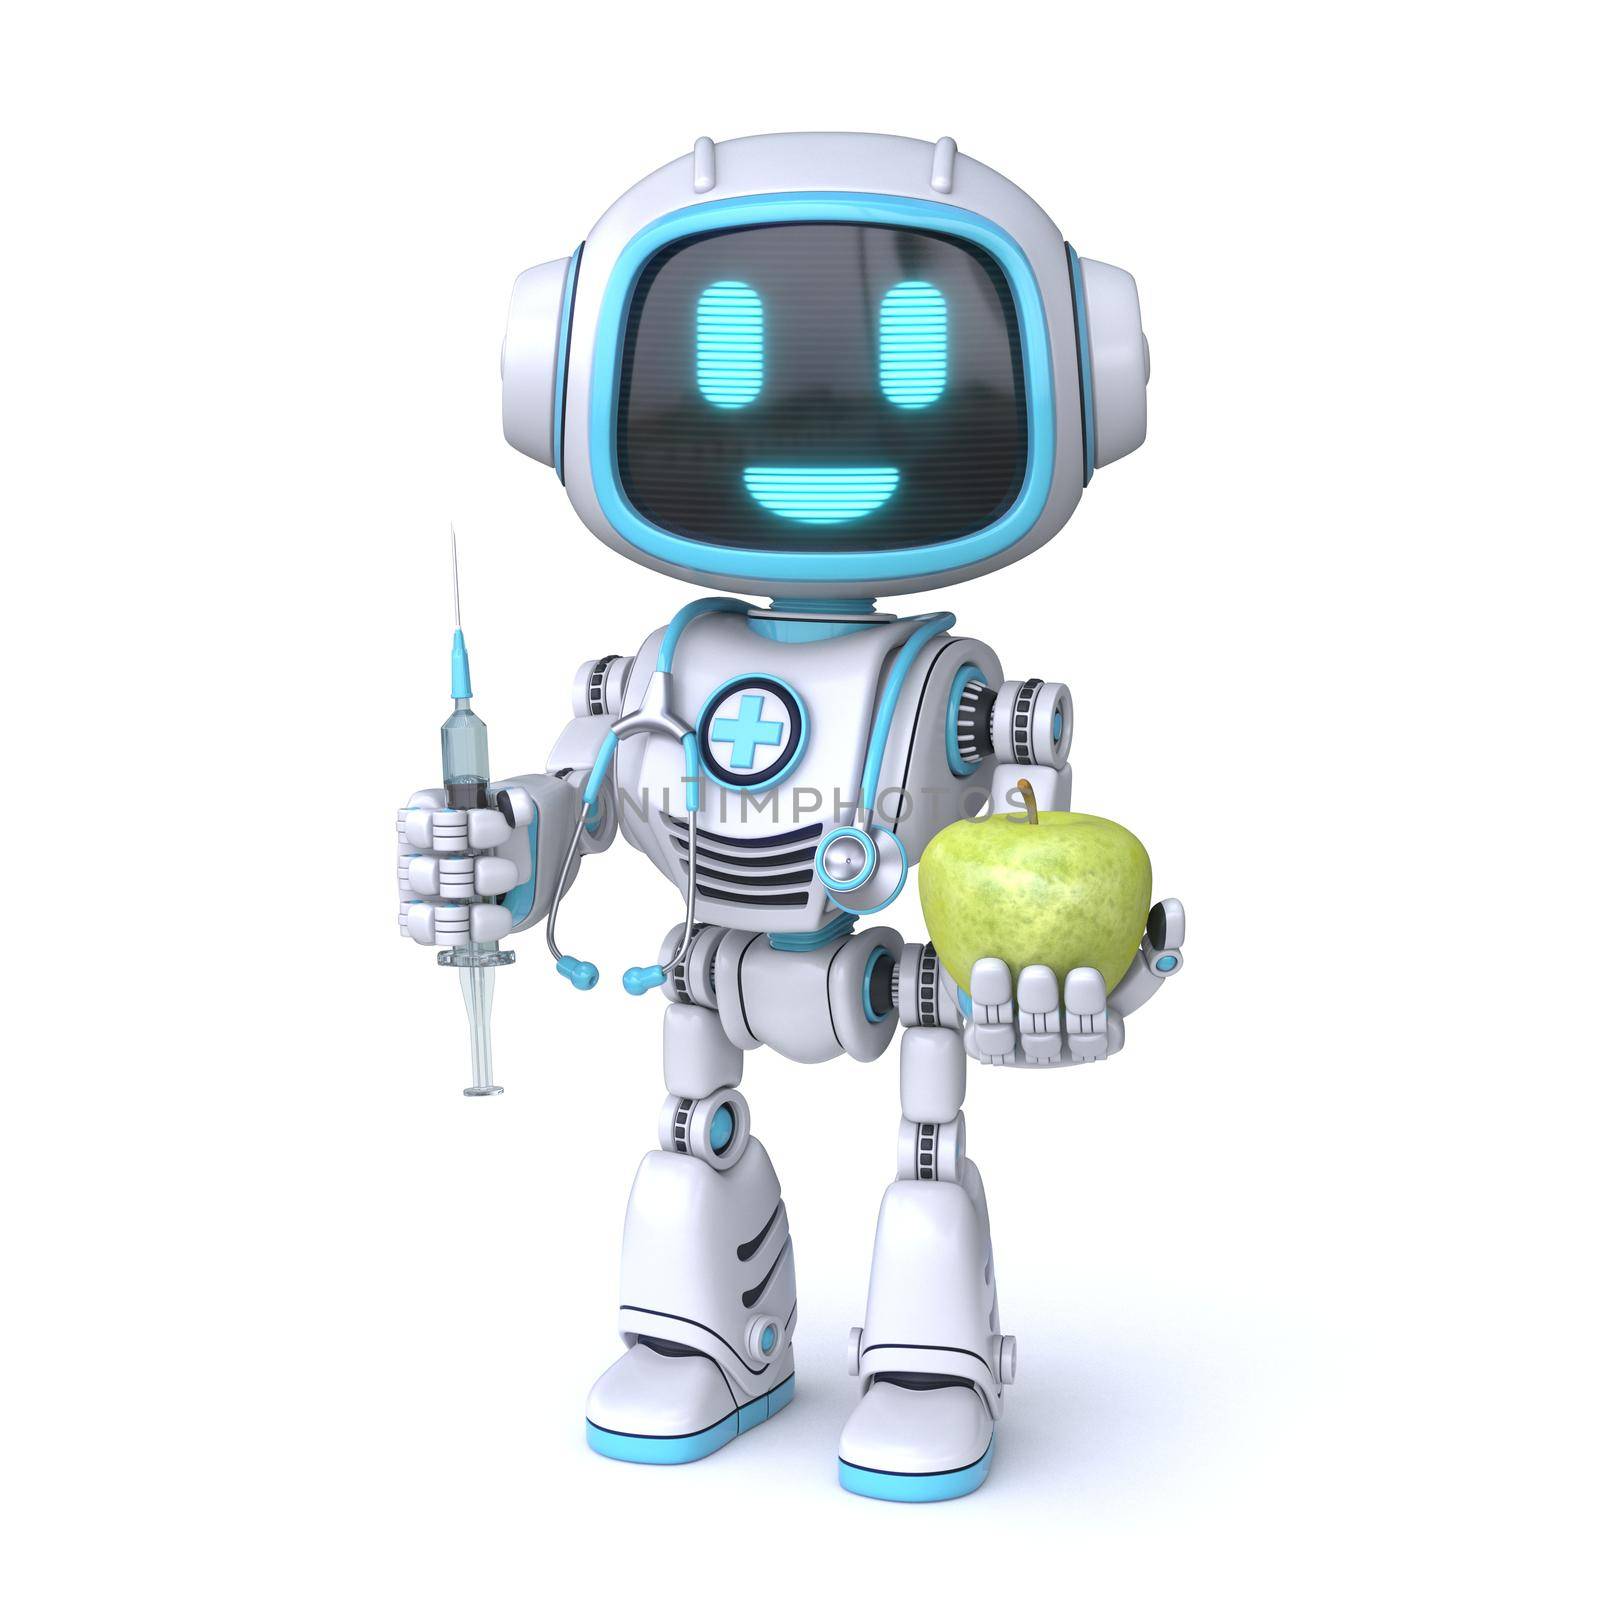 Cute blue robot Health or disease concept 3D rendering illustration isolated on white background